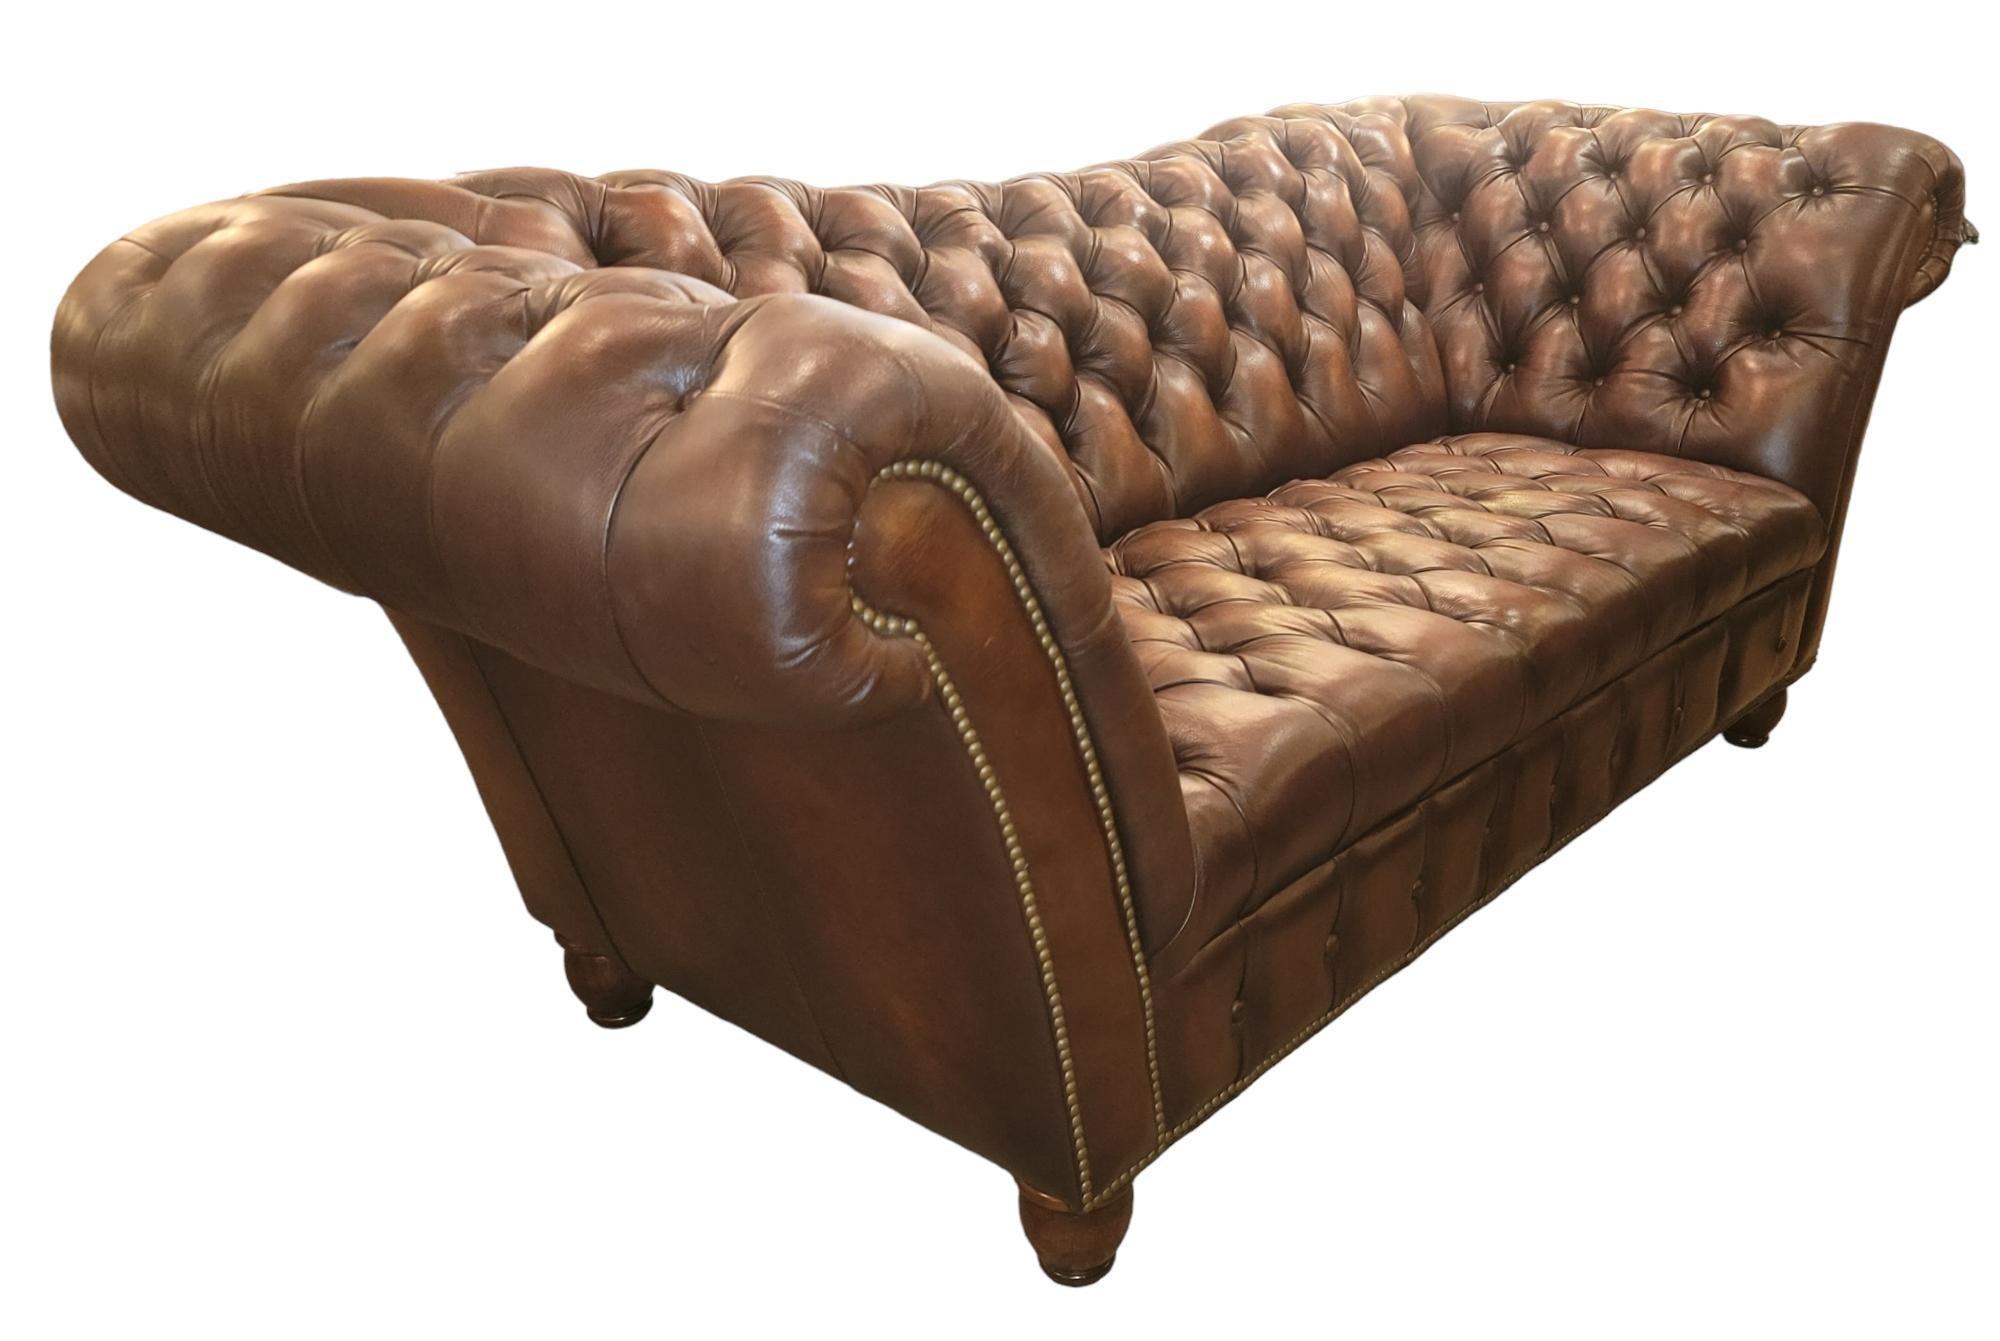 English reverse camel back tufted brown leather three seat sofa with wonderful, rolled arms with original buttons. The Brown leather is in great condition. Such a soft and comfortable seat design with soft supple seats.